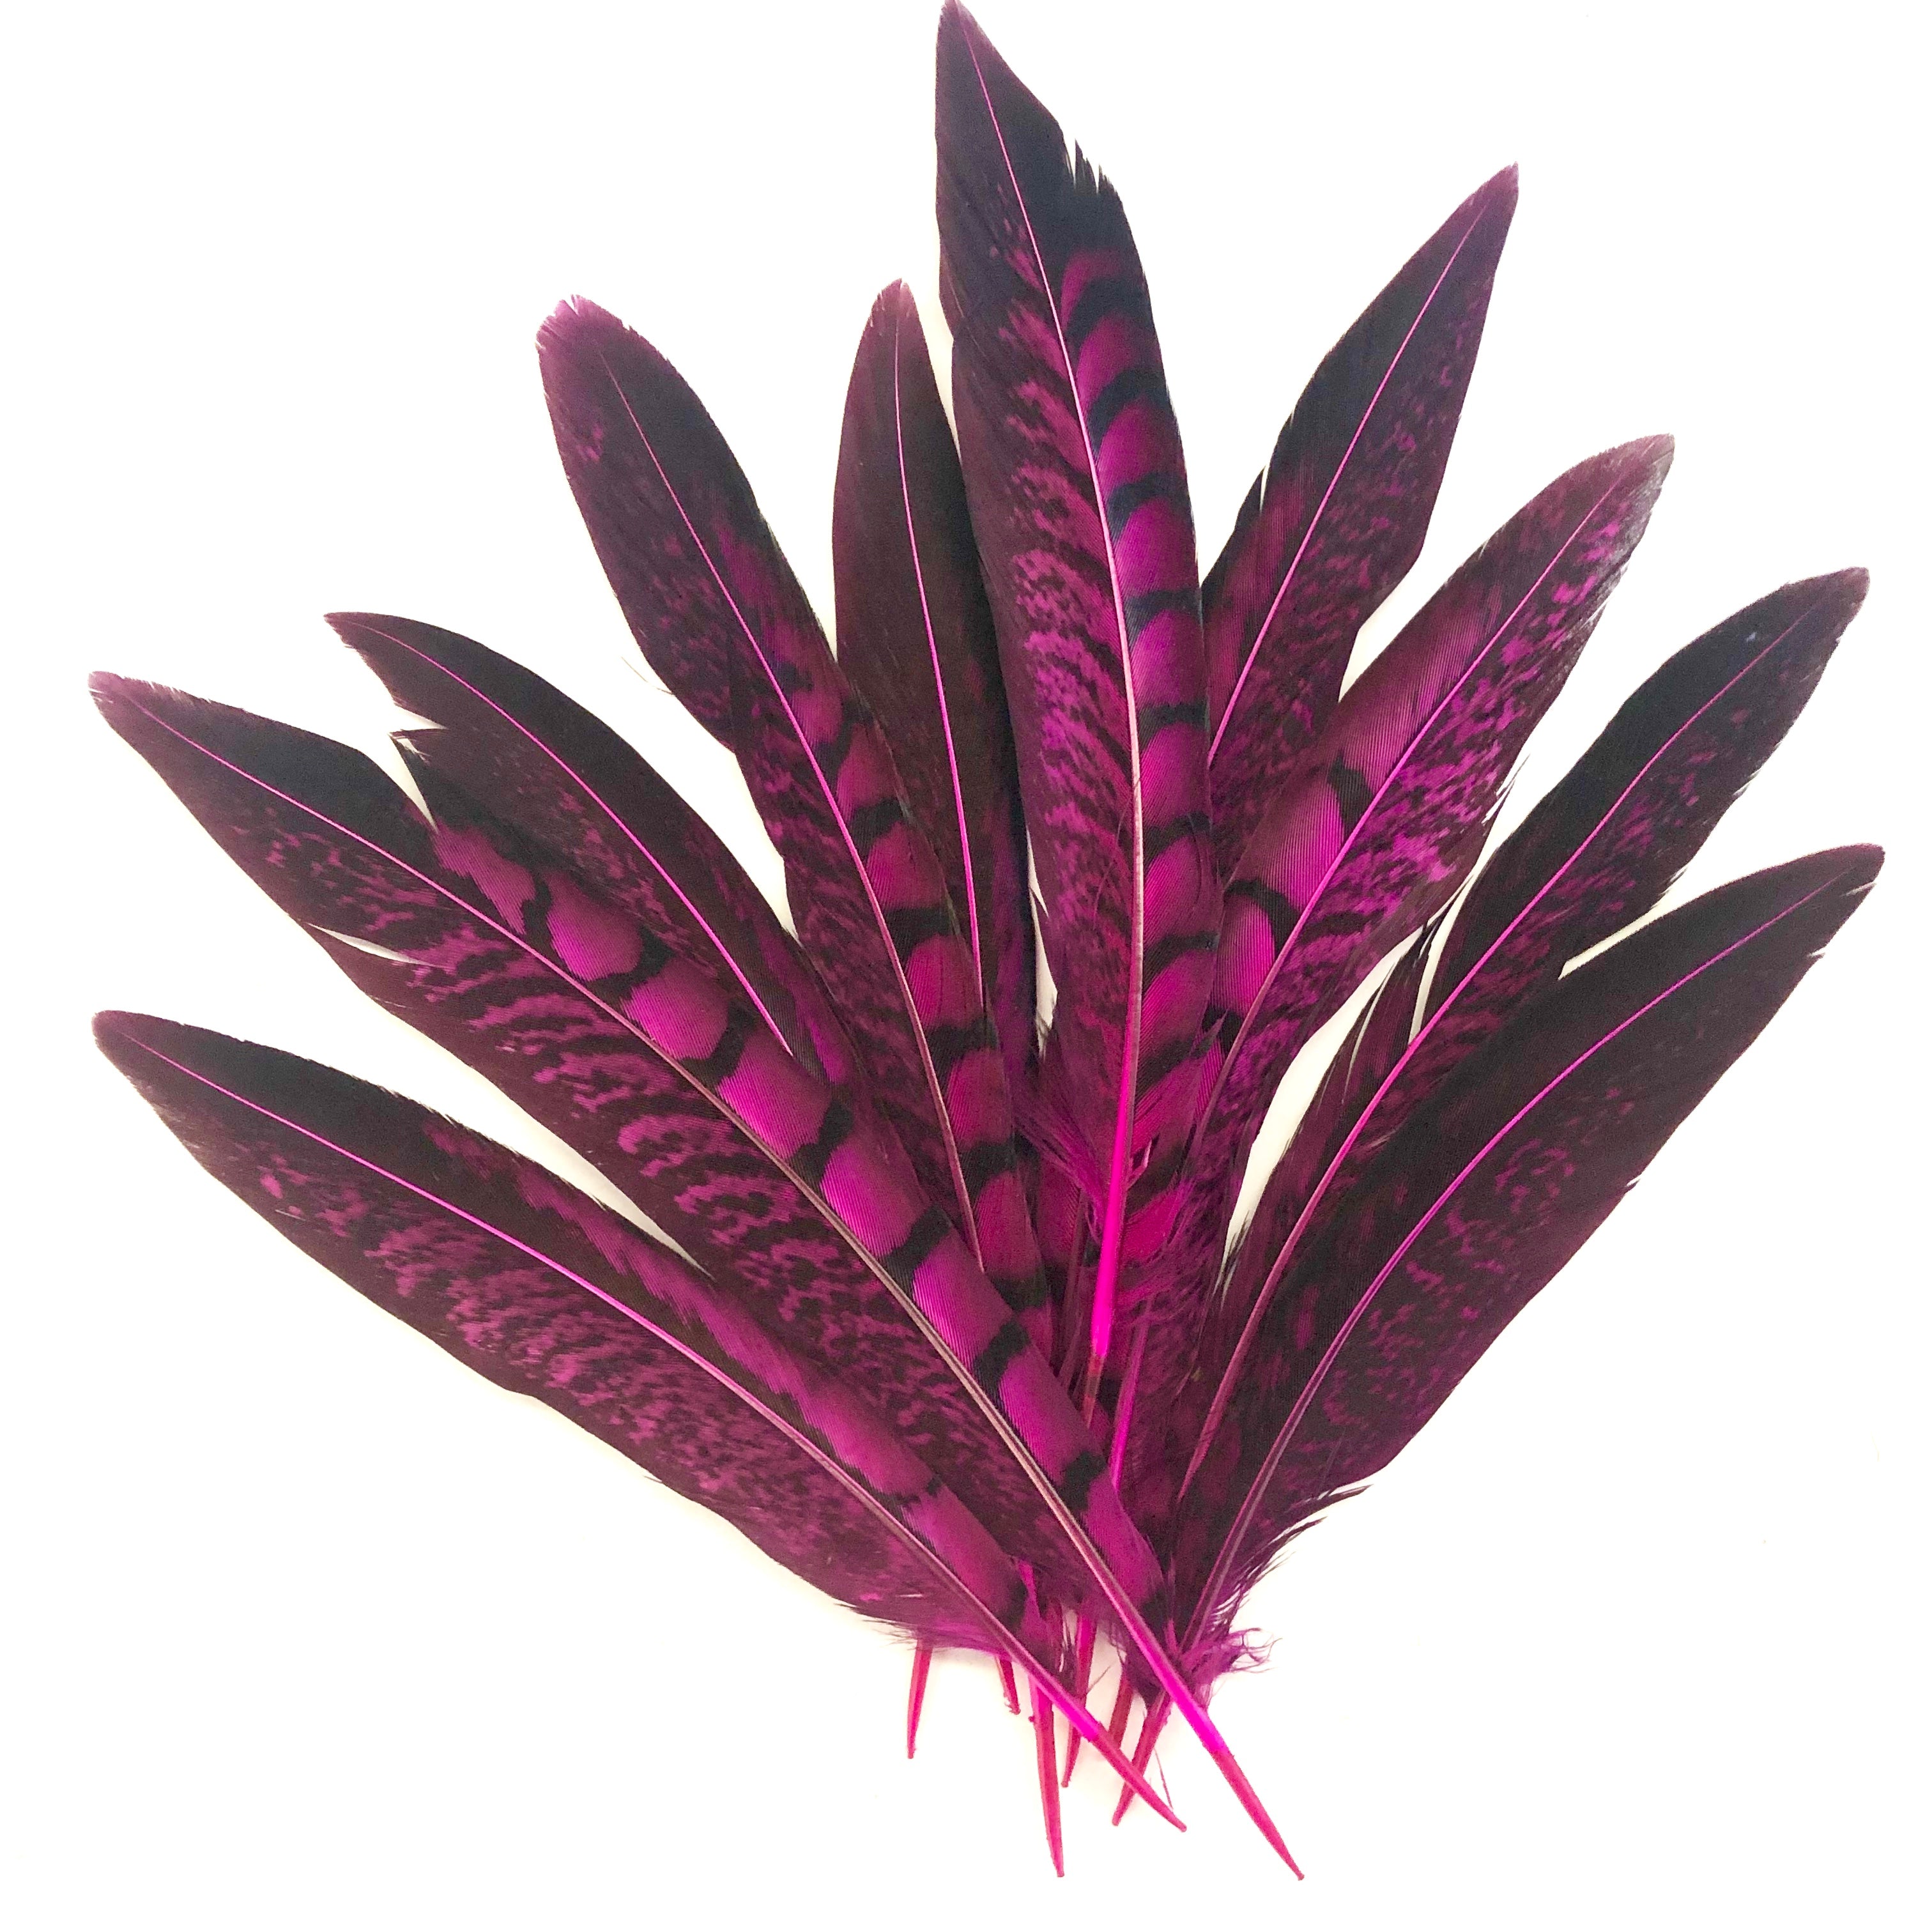 5" to 10" Lady Amherst Pheasant Side Tail Feather x 10 pcs - Cerise